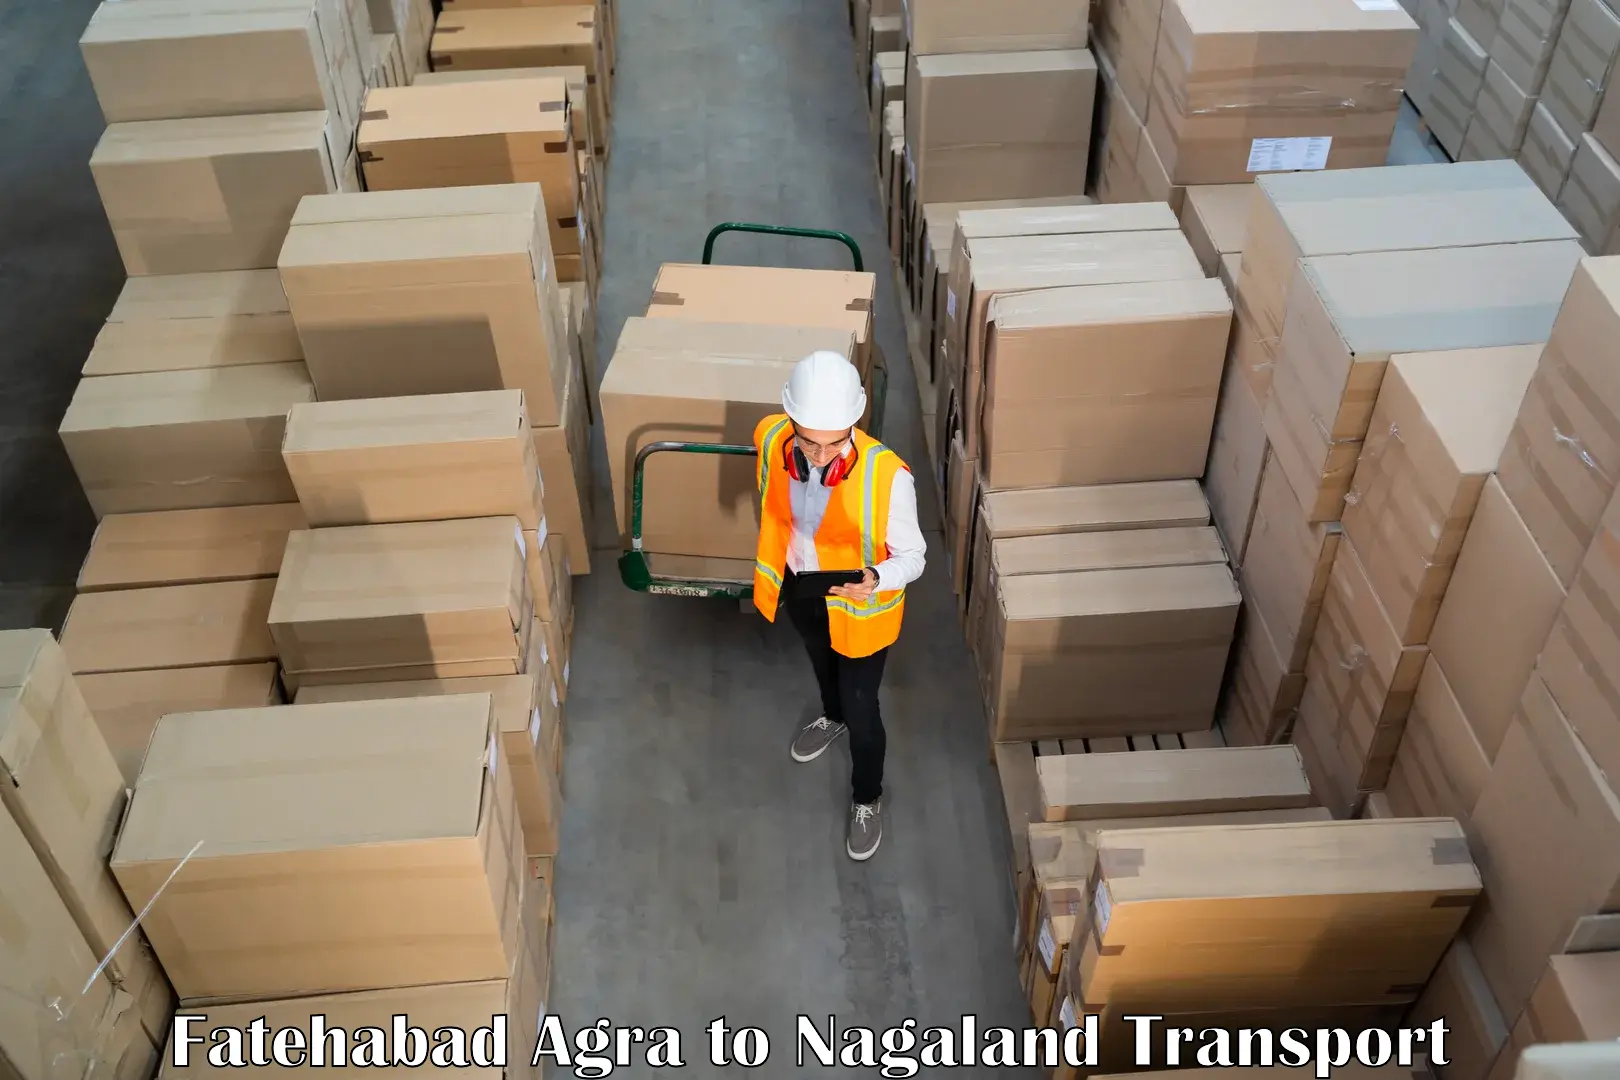 Daily parcel service transport Fatehabad Agra to Nagaland